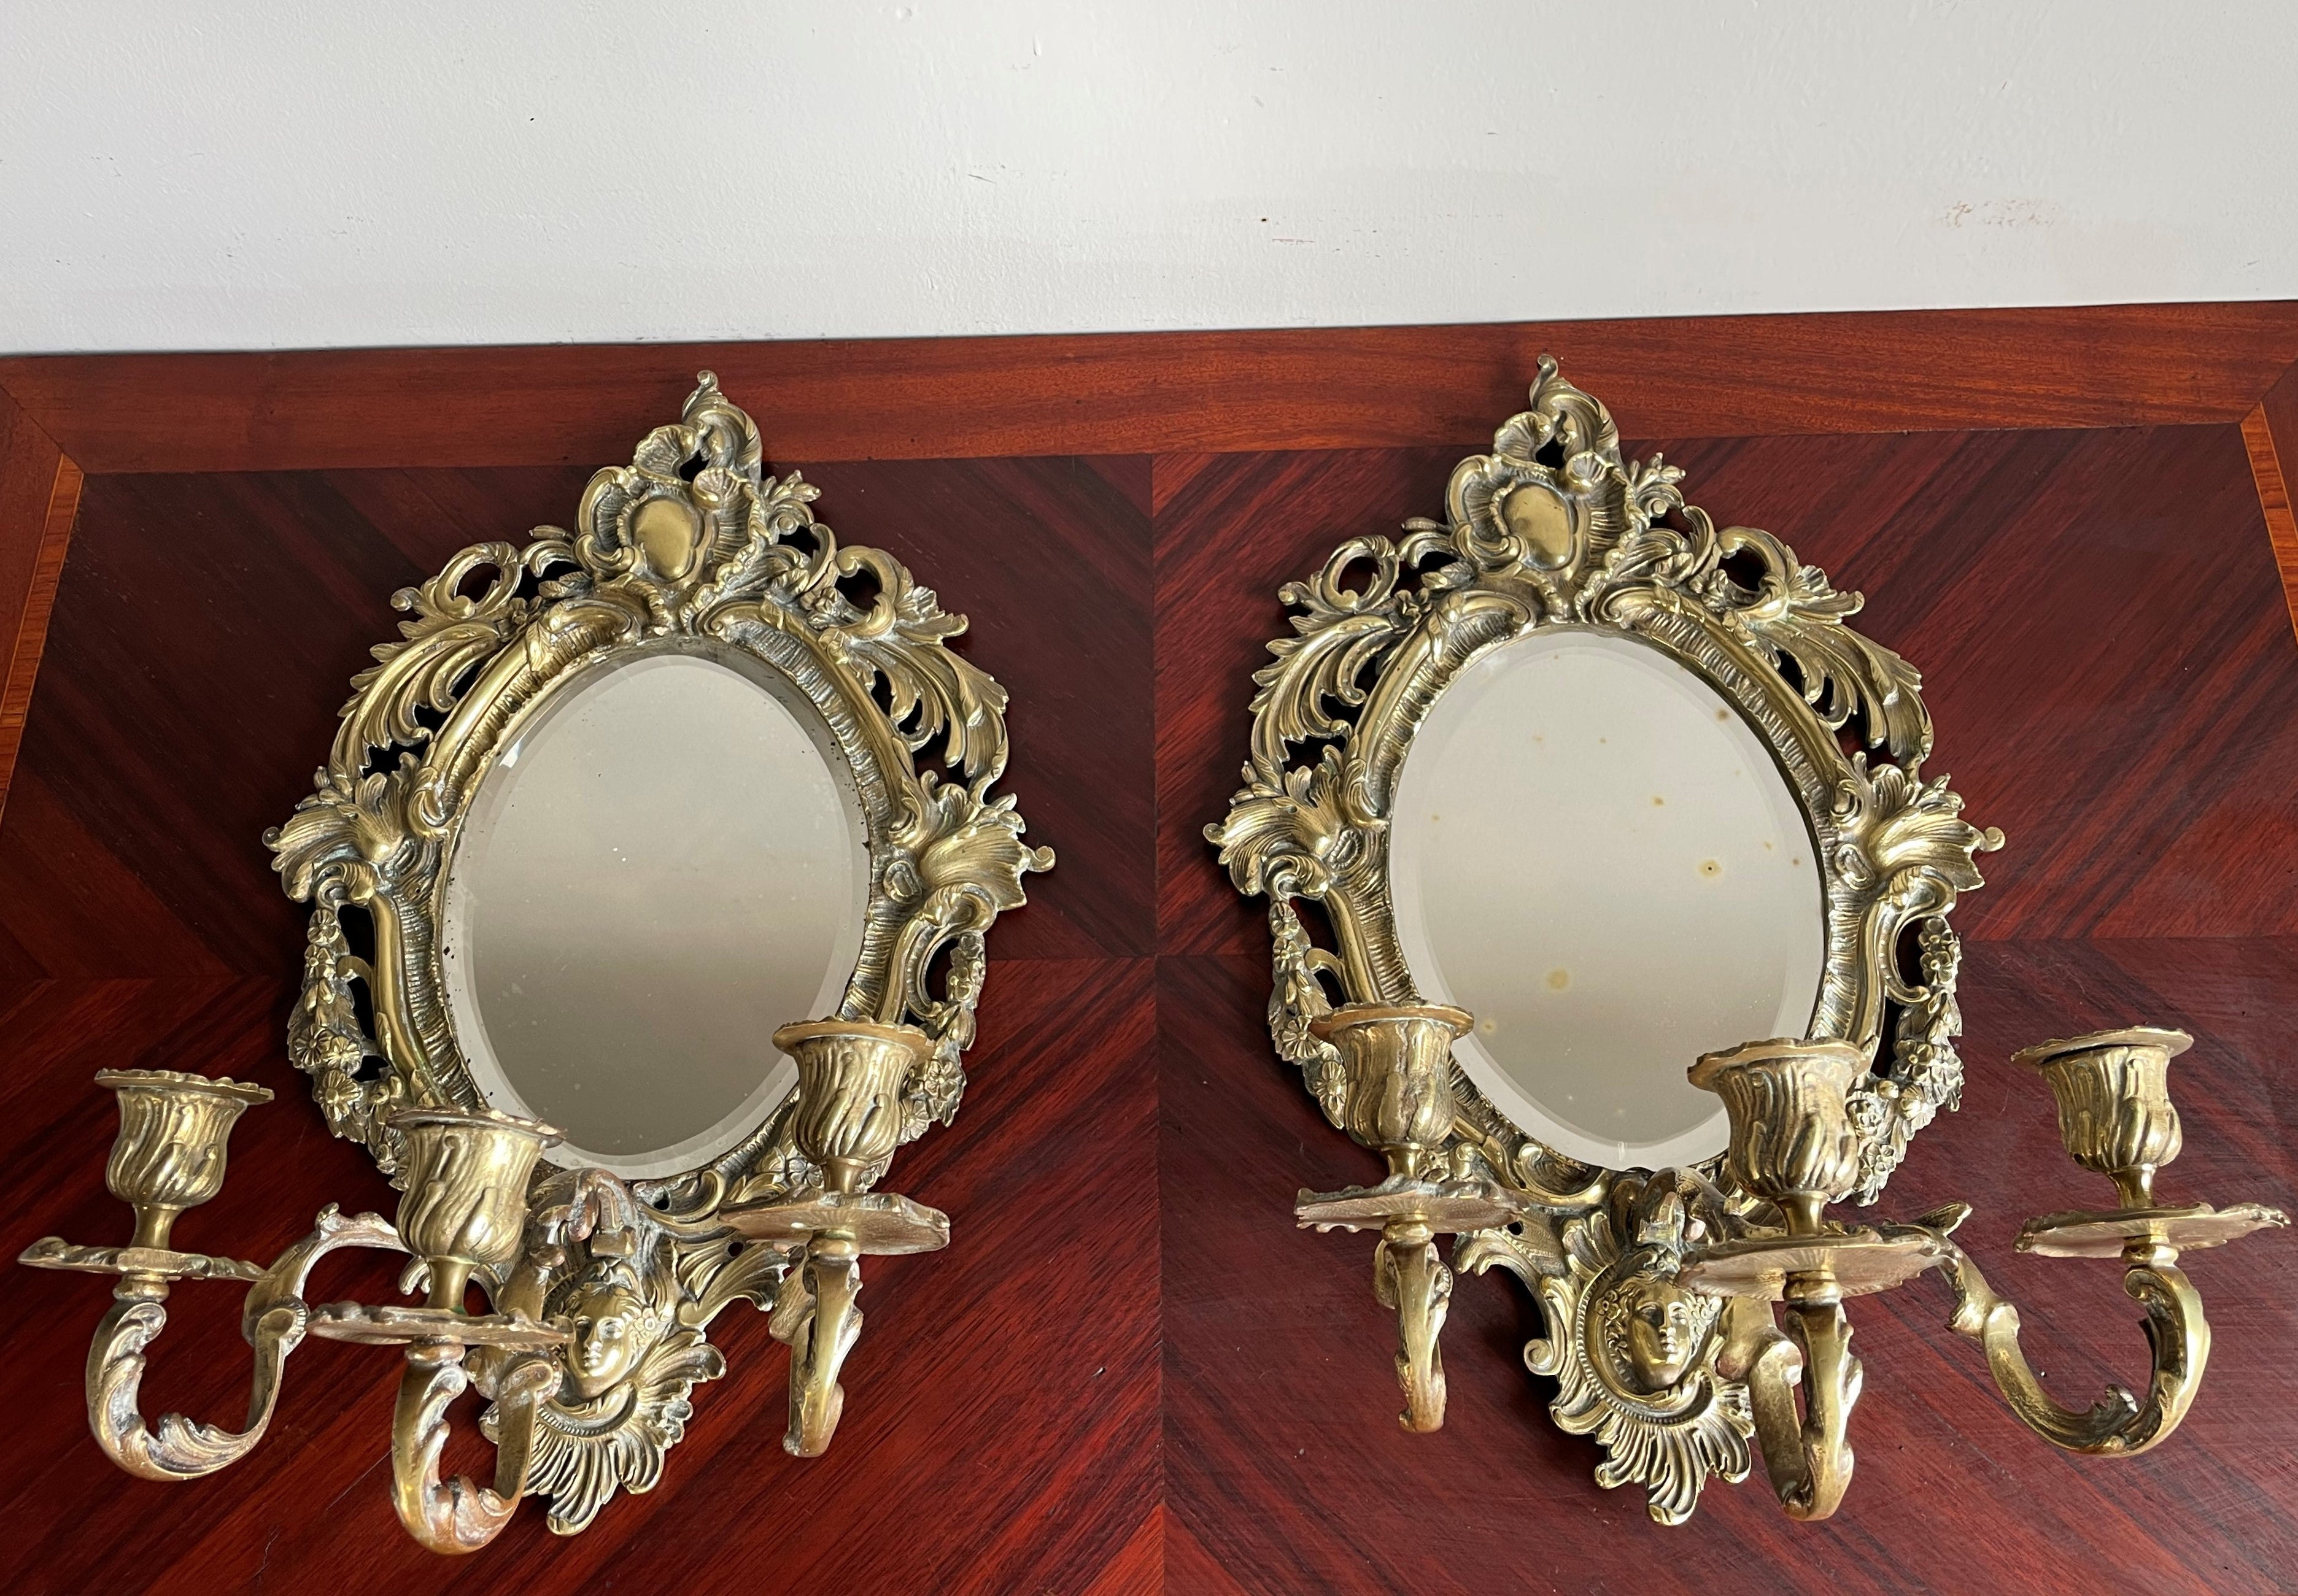 Beautiful and practical size pair of Rococo Revival candle sconces.

This antique and superb condition pair of bronze candle holders will look great, for example, above a side table, above your bedside cabinets, in a hallway or on either side of a